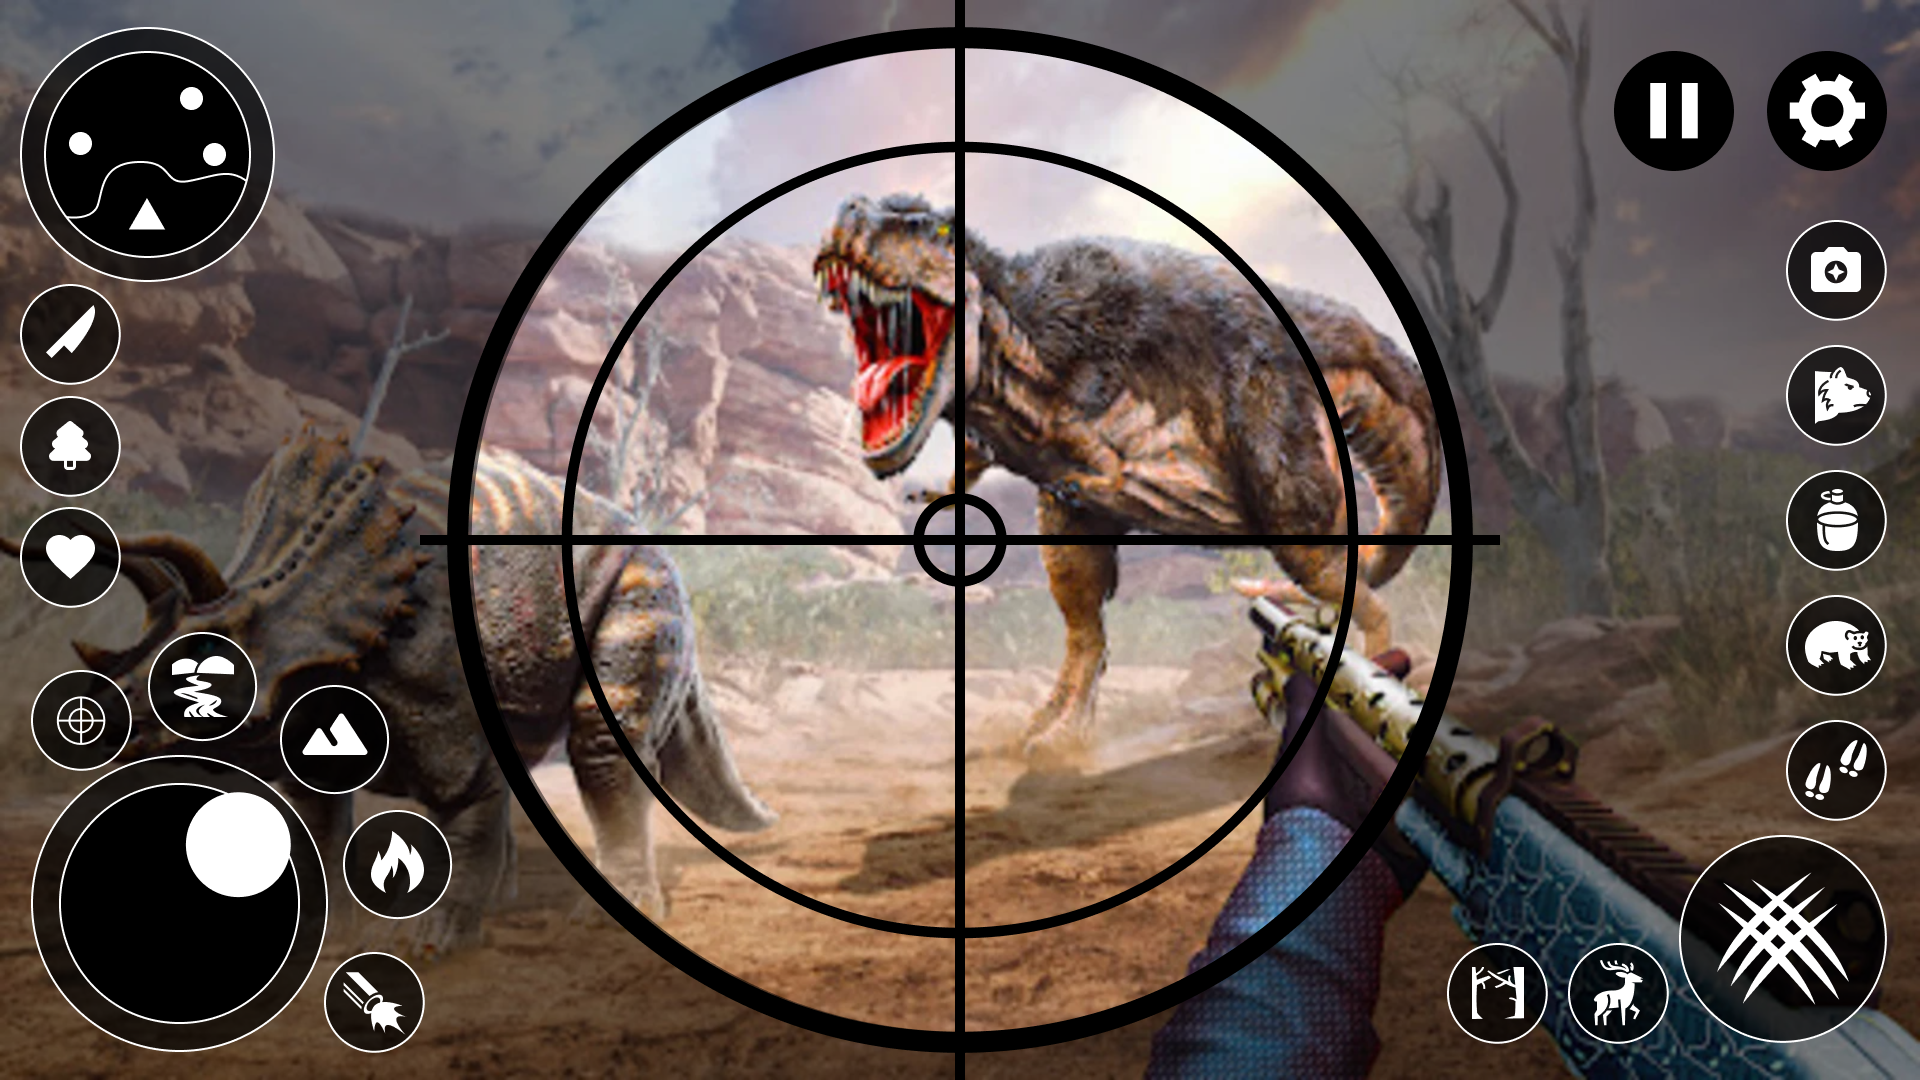 Screenshot 1 of Jeux de Chasse - Sniper Chasse 4.1.2